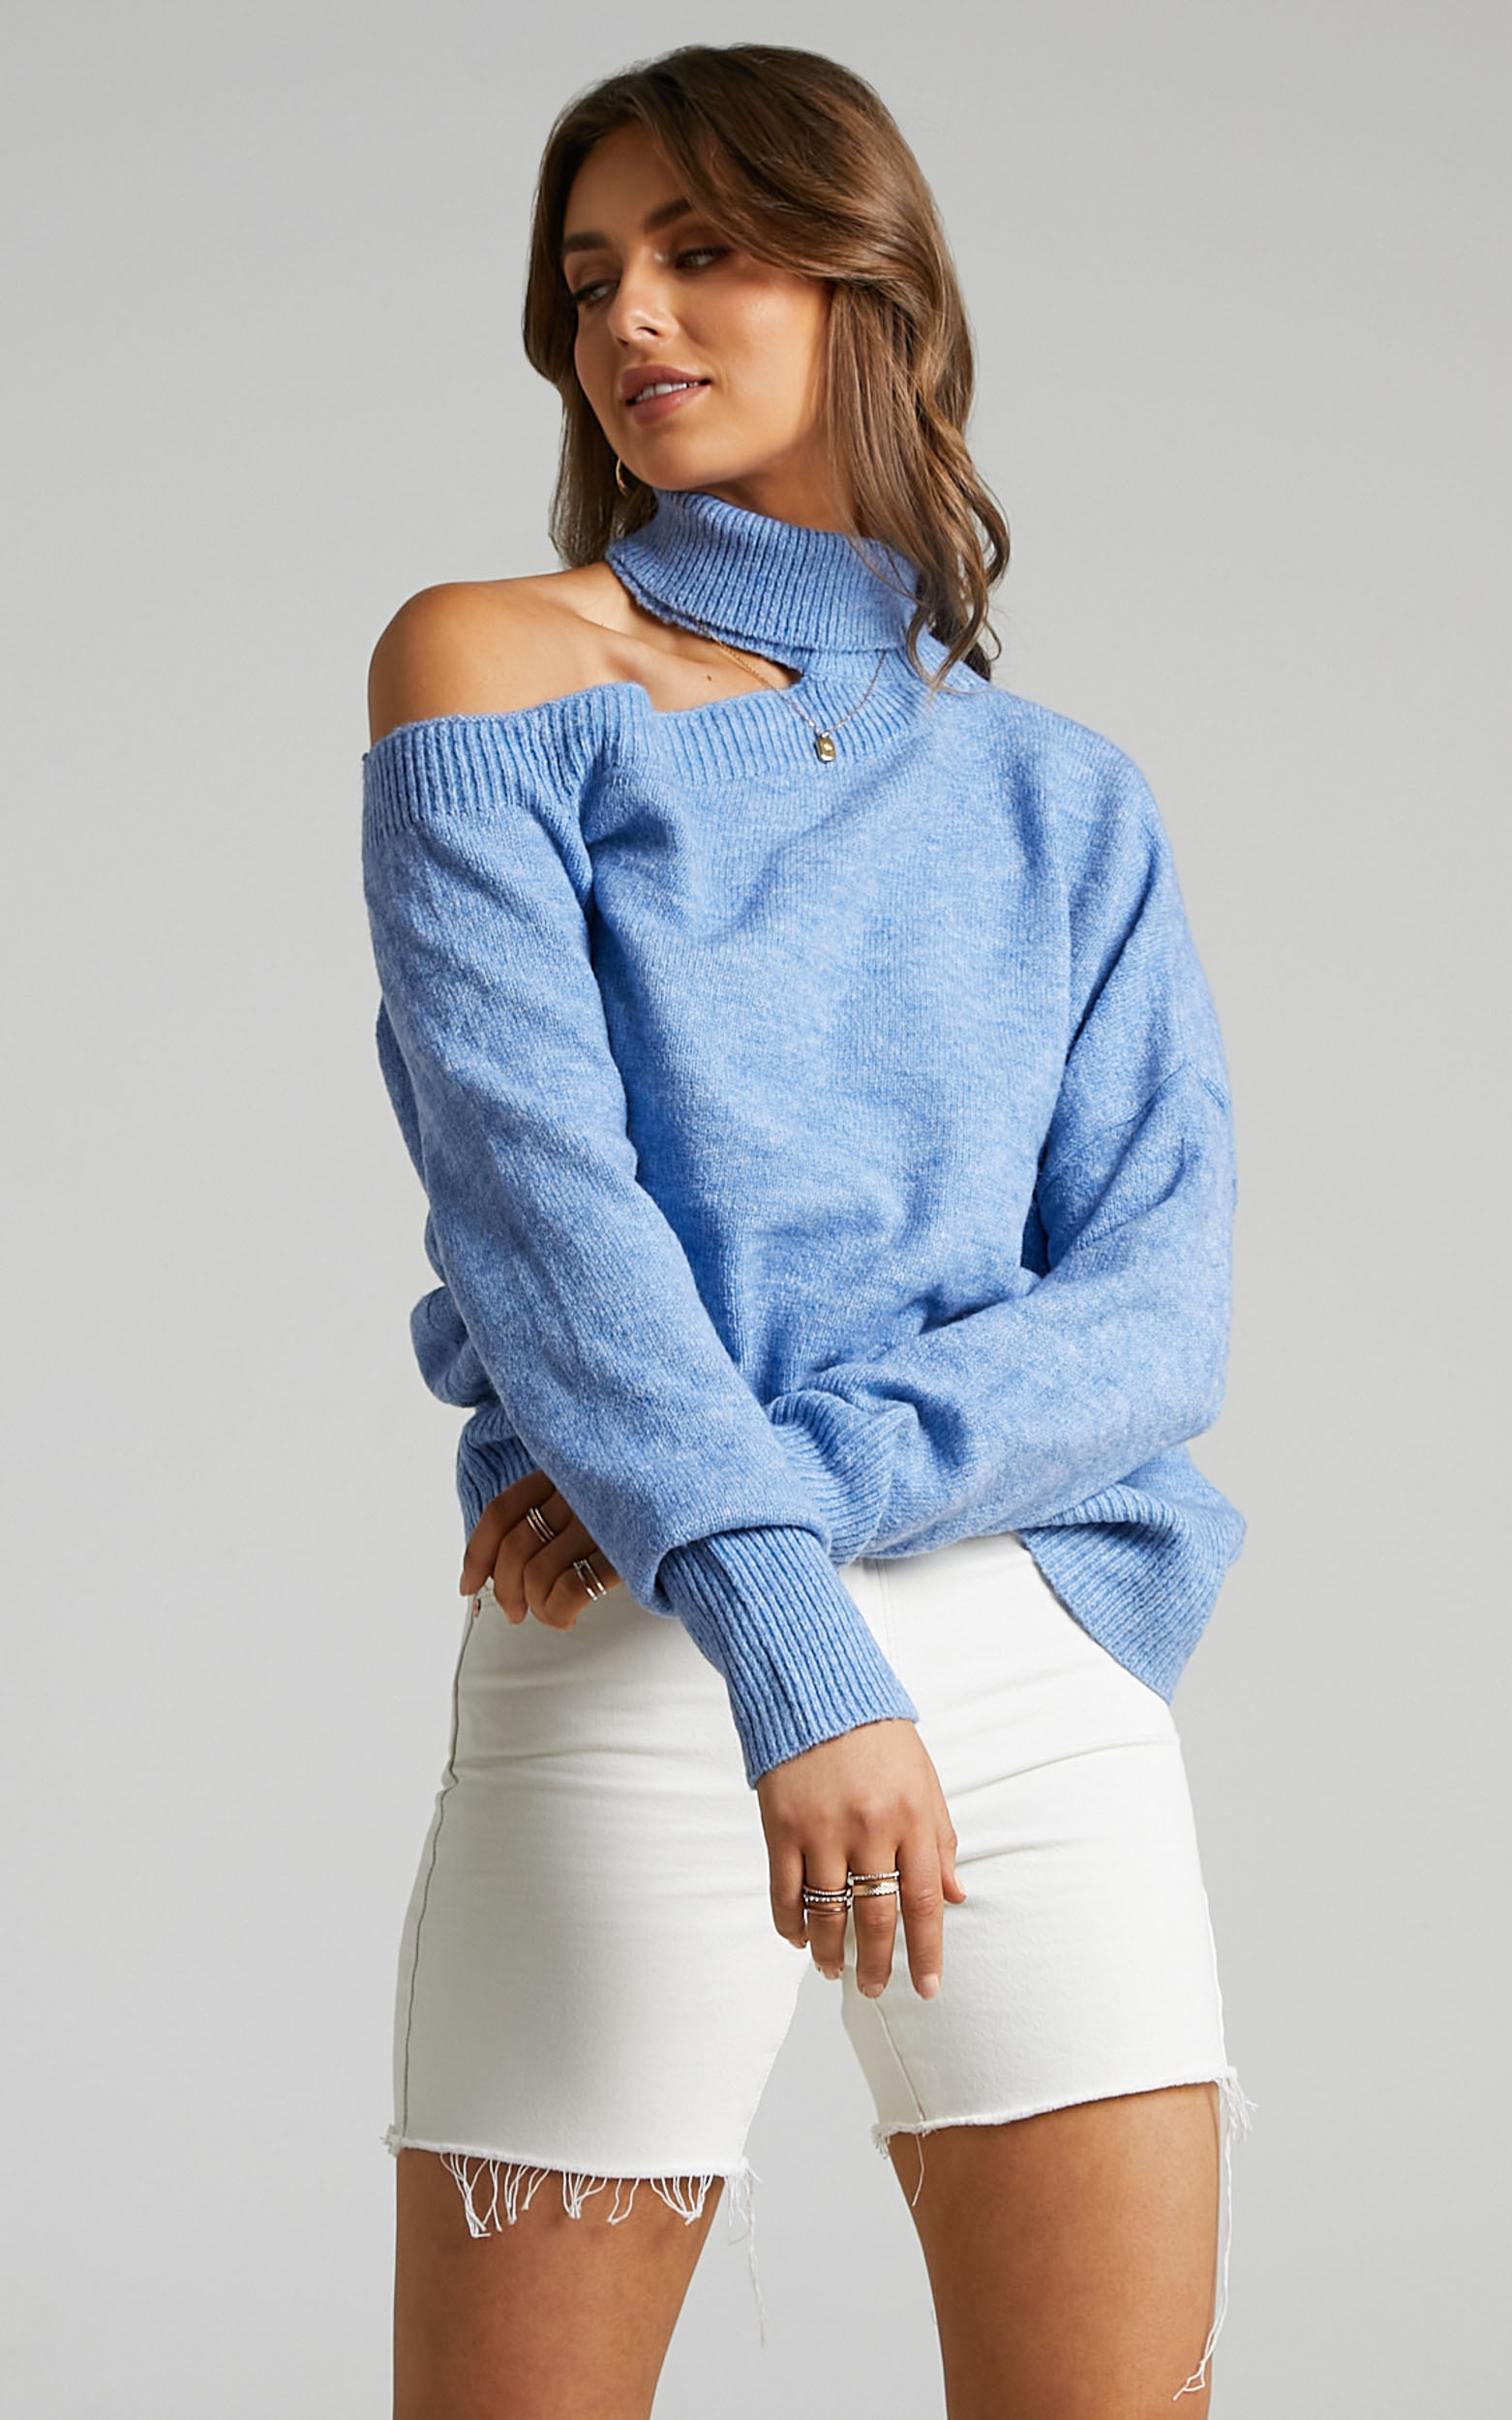 Ceila Knit Top with Shoulder Cut Out in Cornflower Blue - 06, BLU1, hi-res image number null